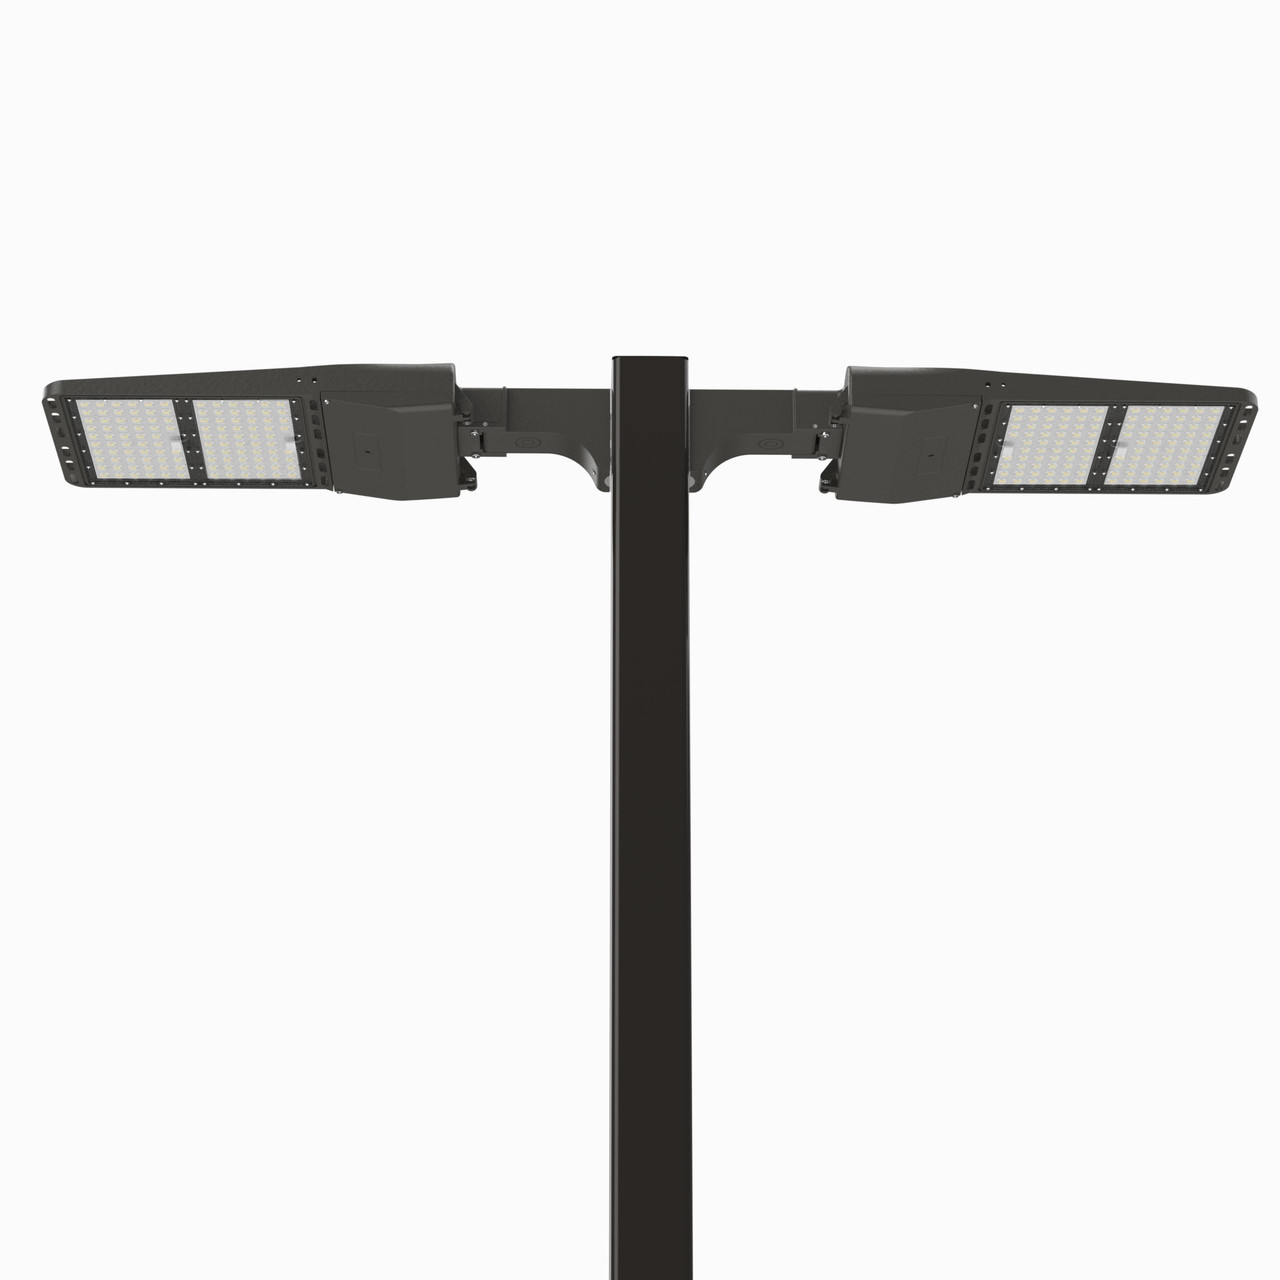 Light Pole Kit with Two LED Area Lights, Selectable Wattage 185/240/300 &  Color Temperature, 20-30 Foot Pole Height Options